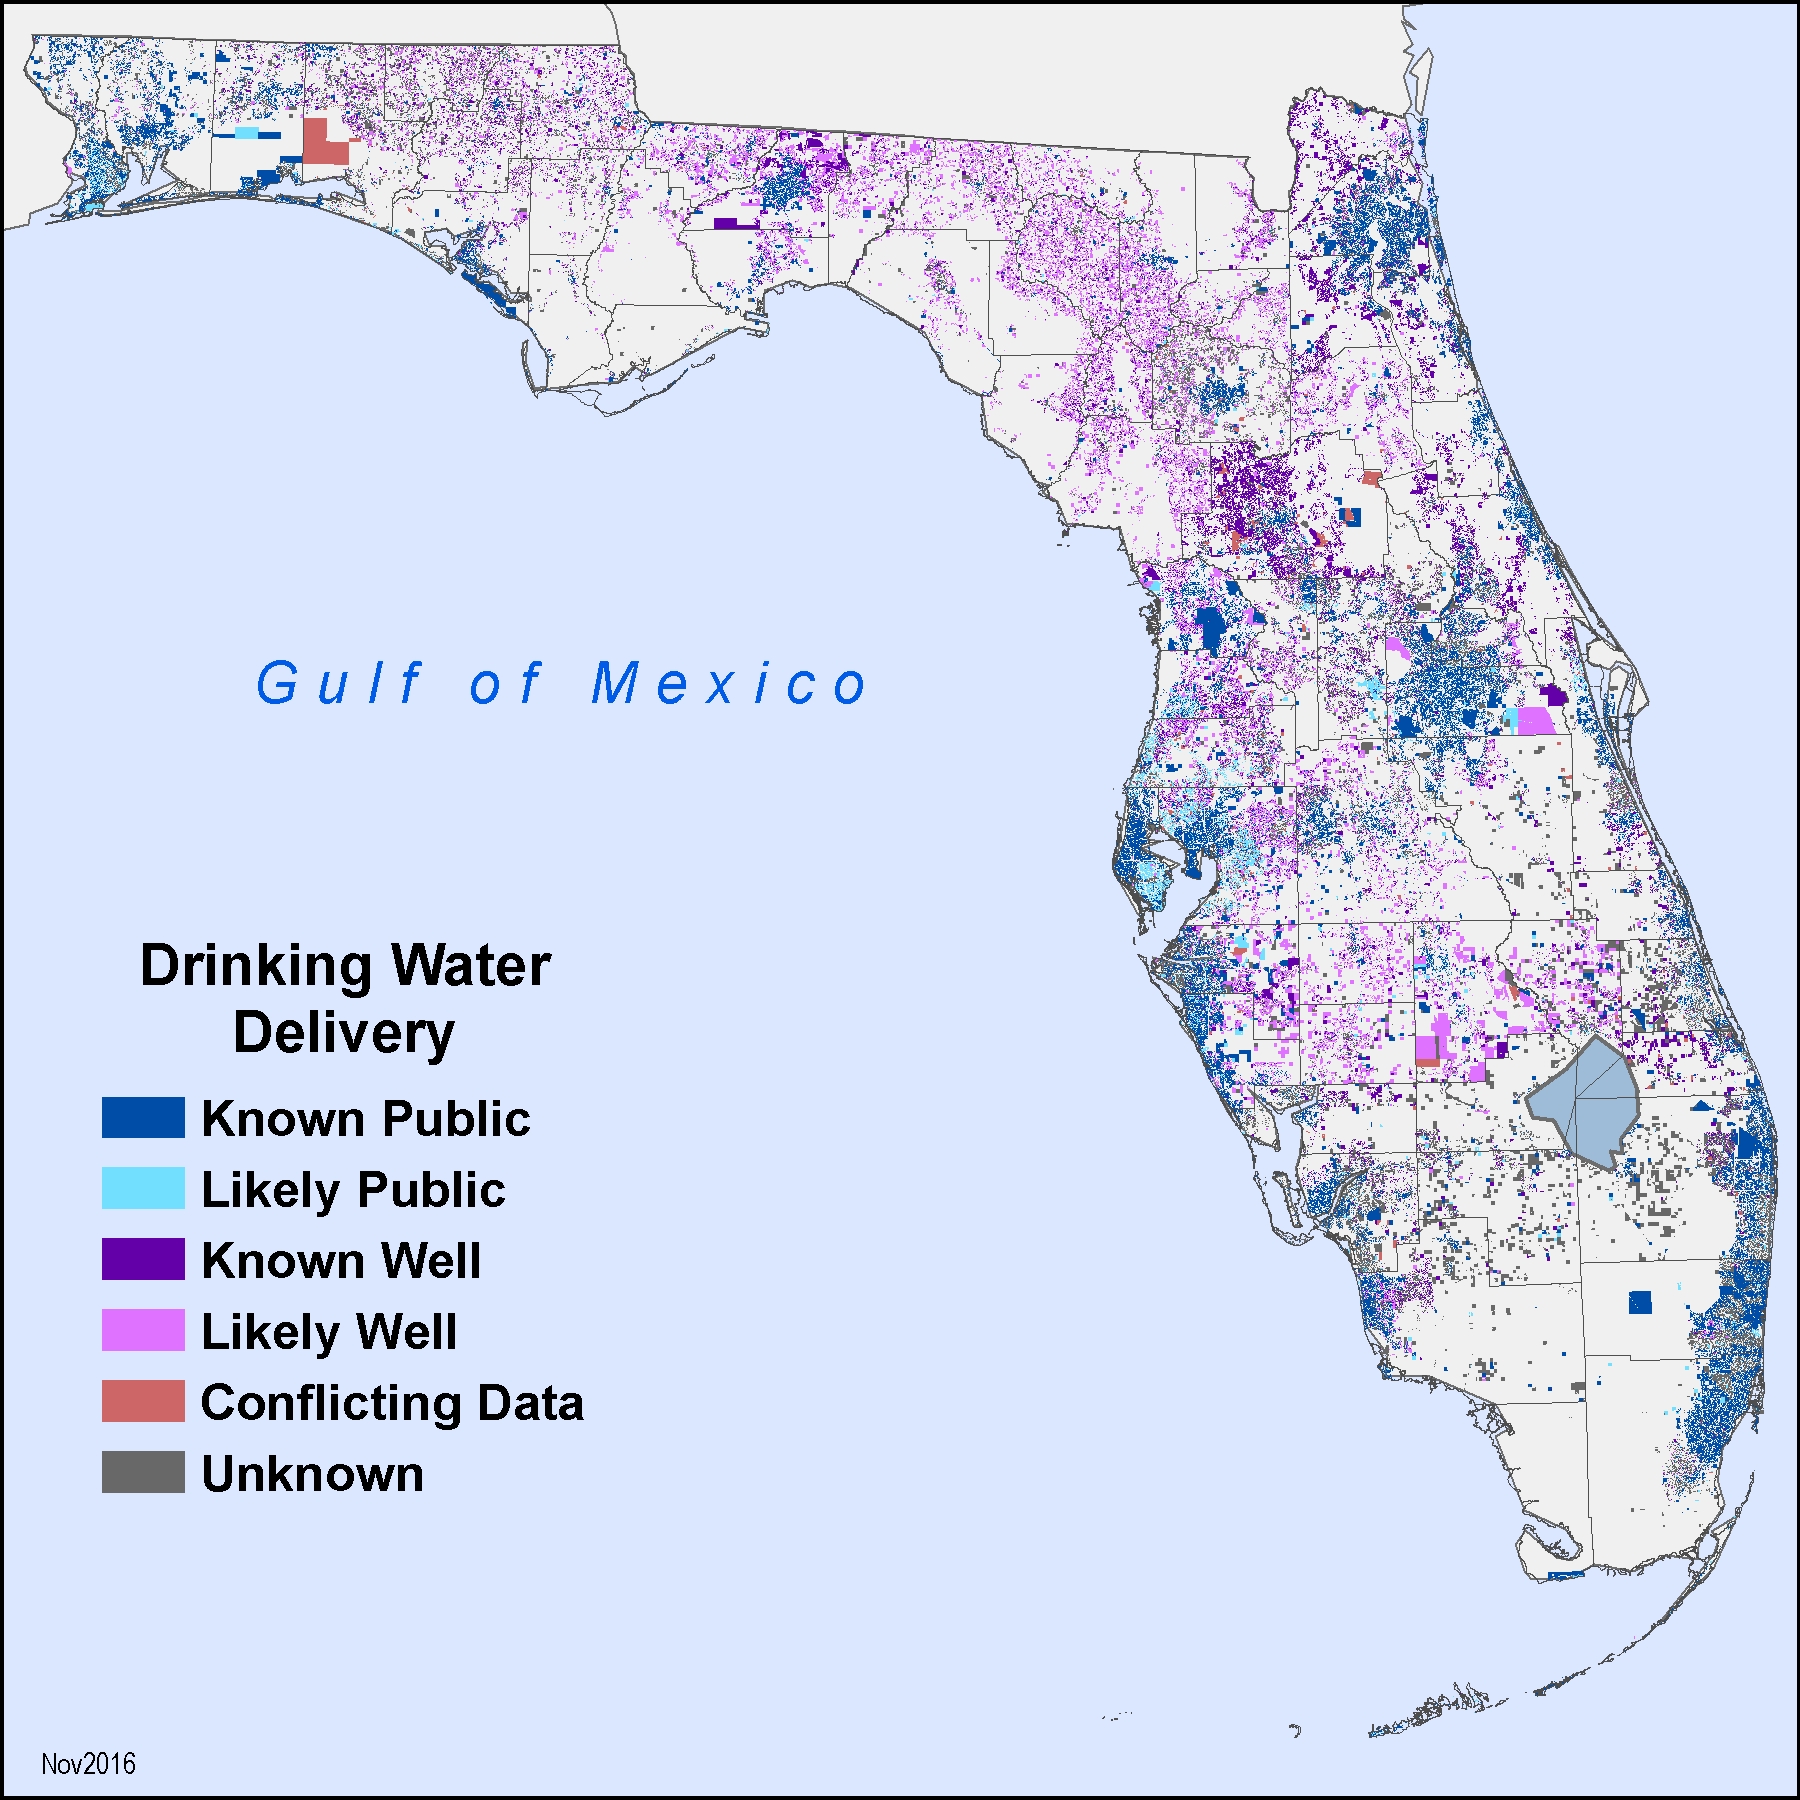 Drinking Water Sources by Property in Florida